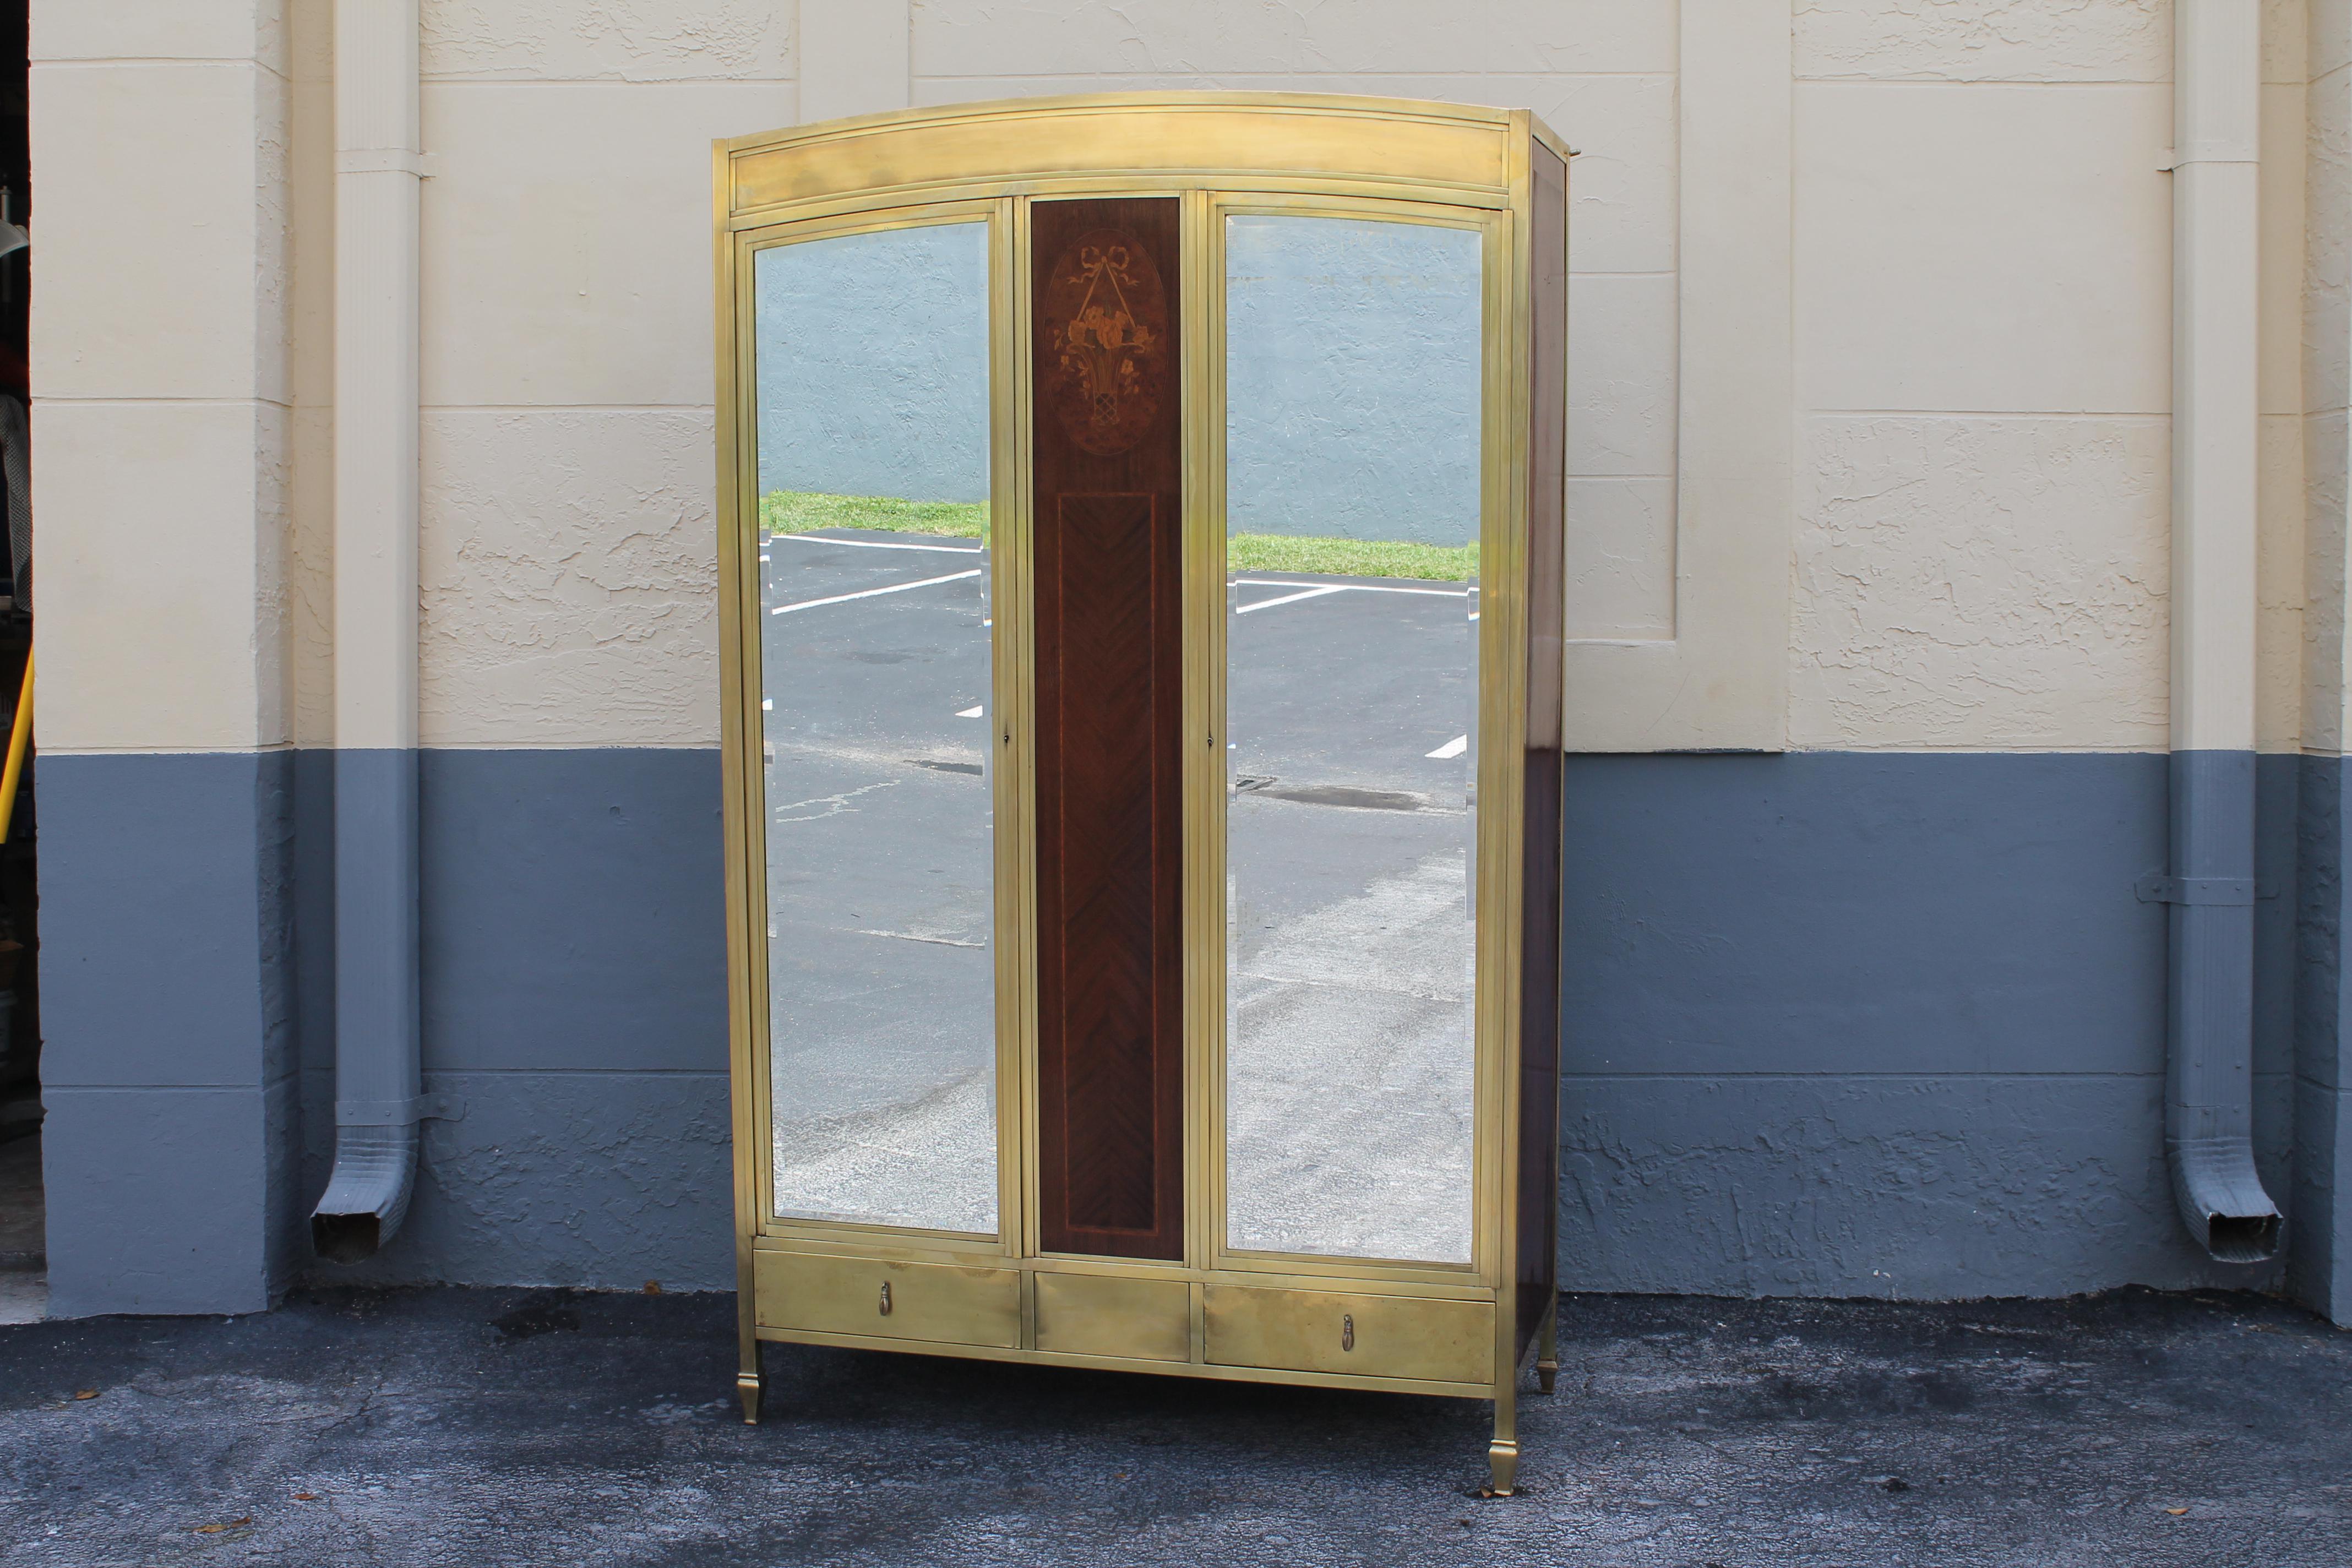 This 1920's French Art Deco Armoire/ Wardrobe is constructed with solid brass. It is of the highest quality. Heavy lugnuts on to fix the back onto the piece see this armoire comes apart into 11 solid parts for an easier shipping, if desired. This